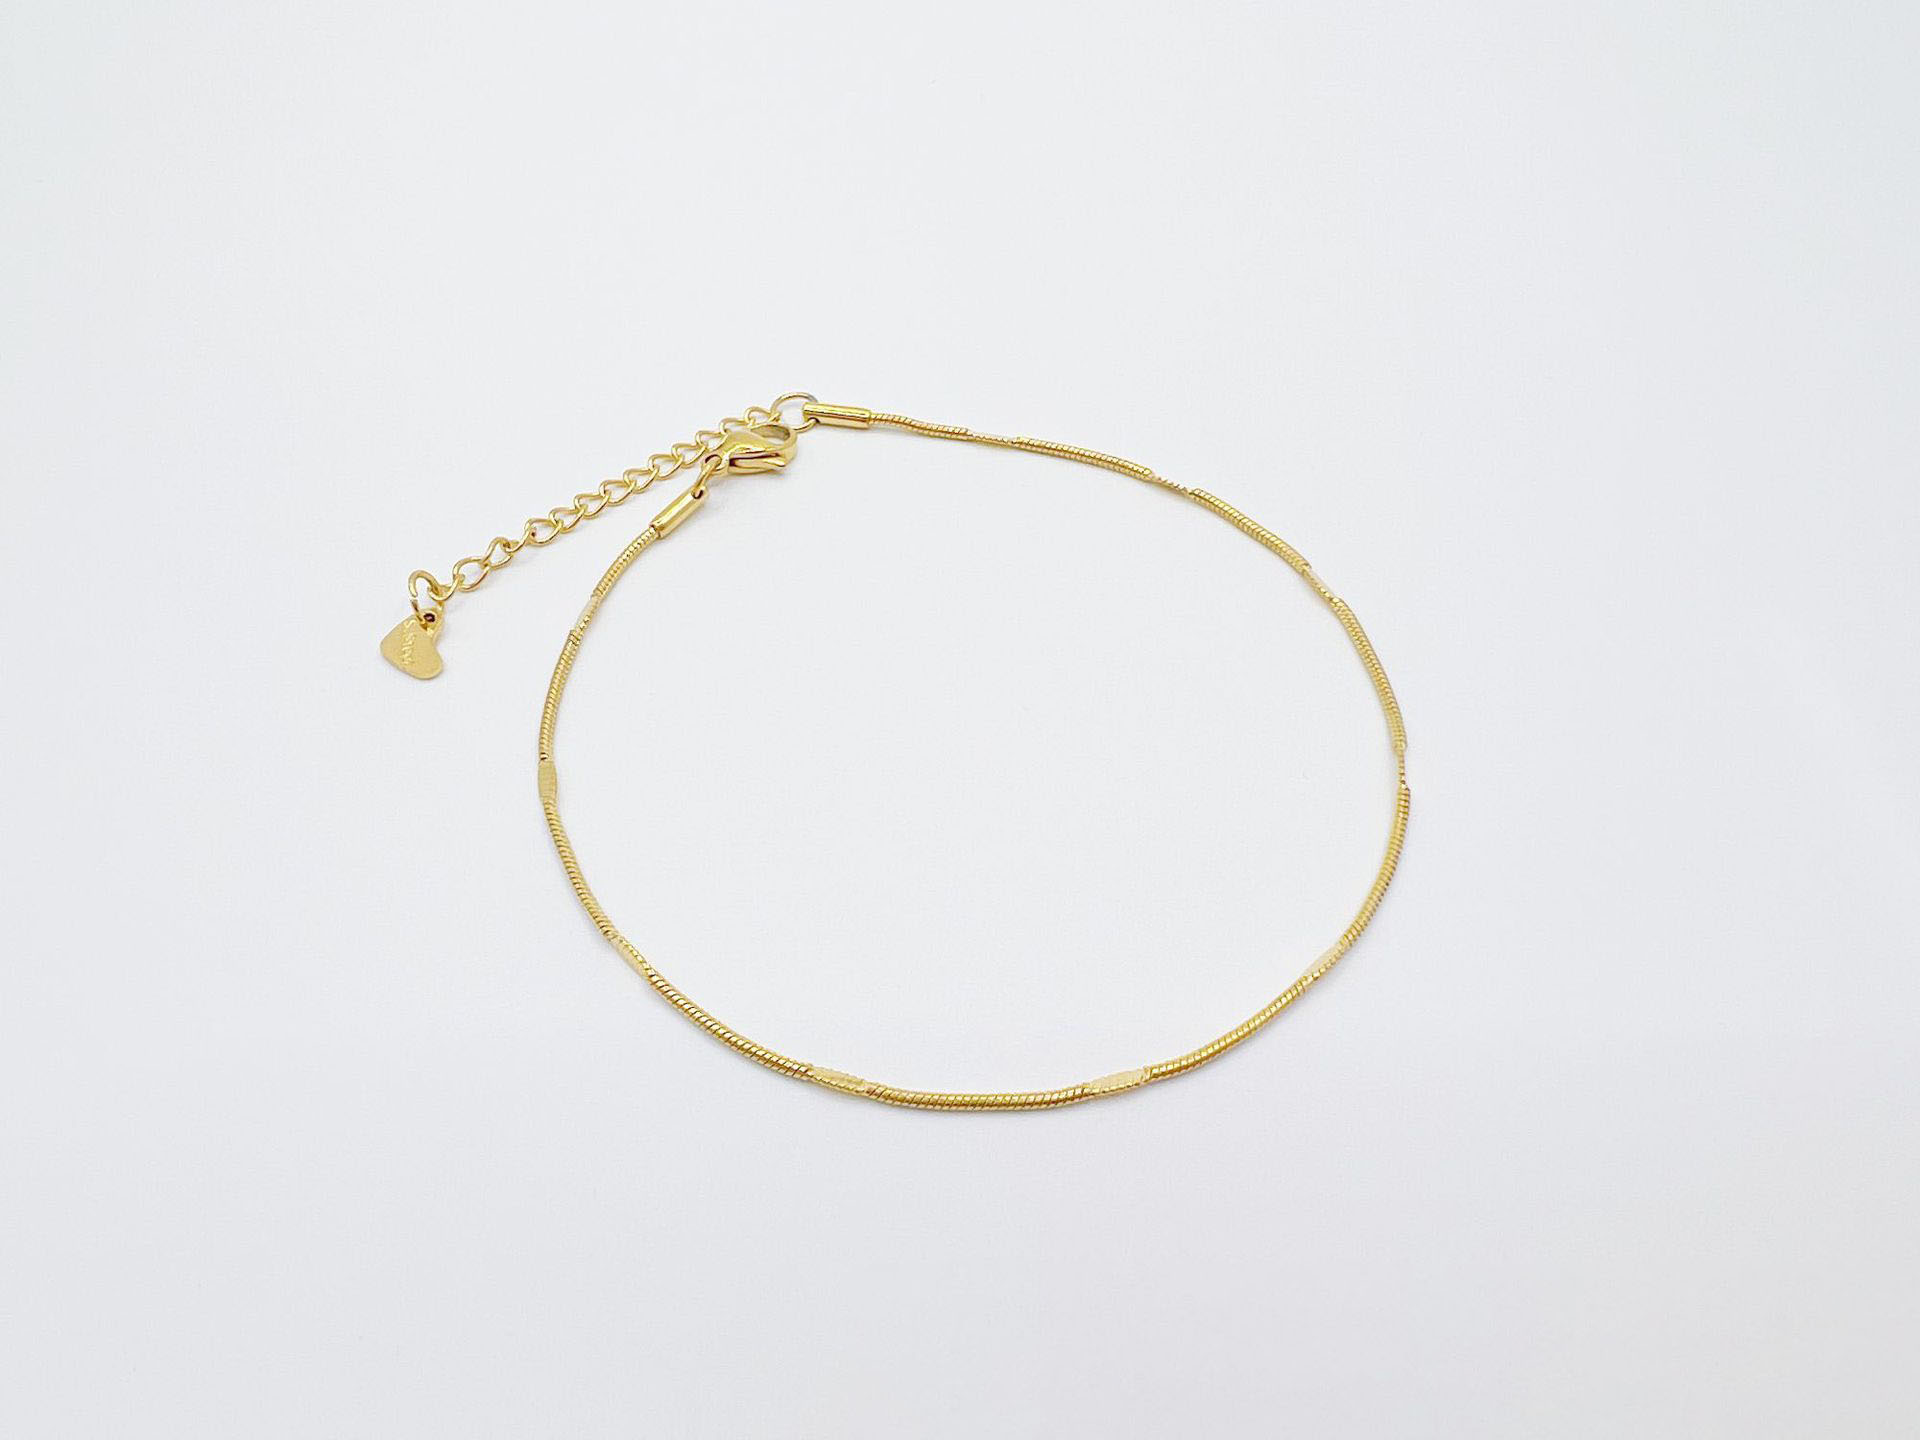 Snake chain calendered gold color